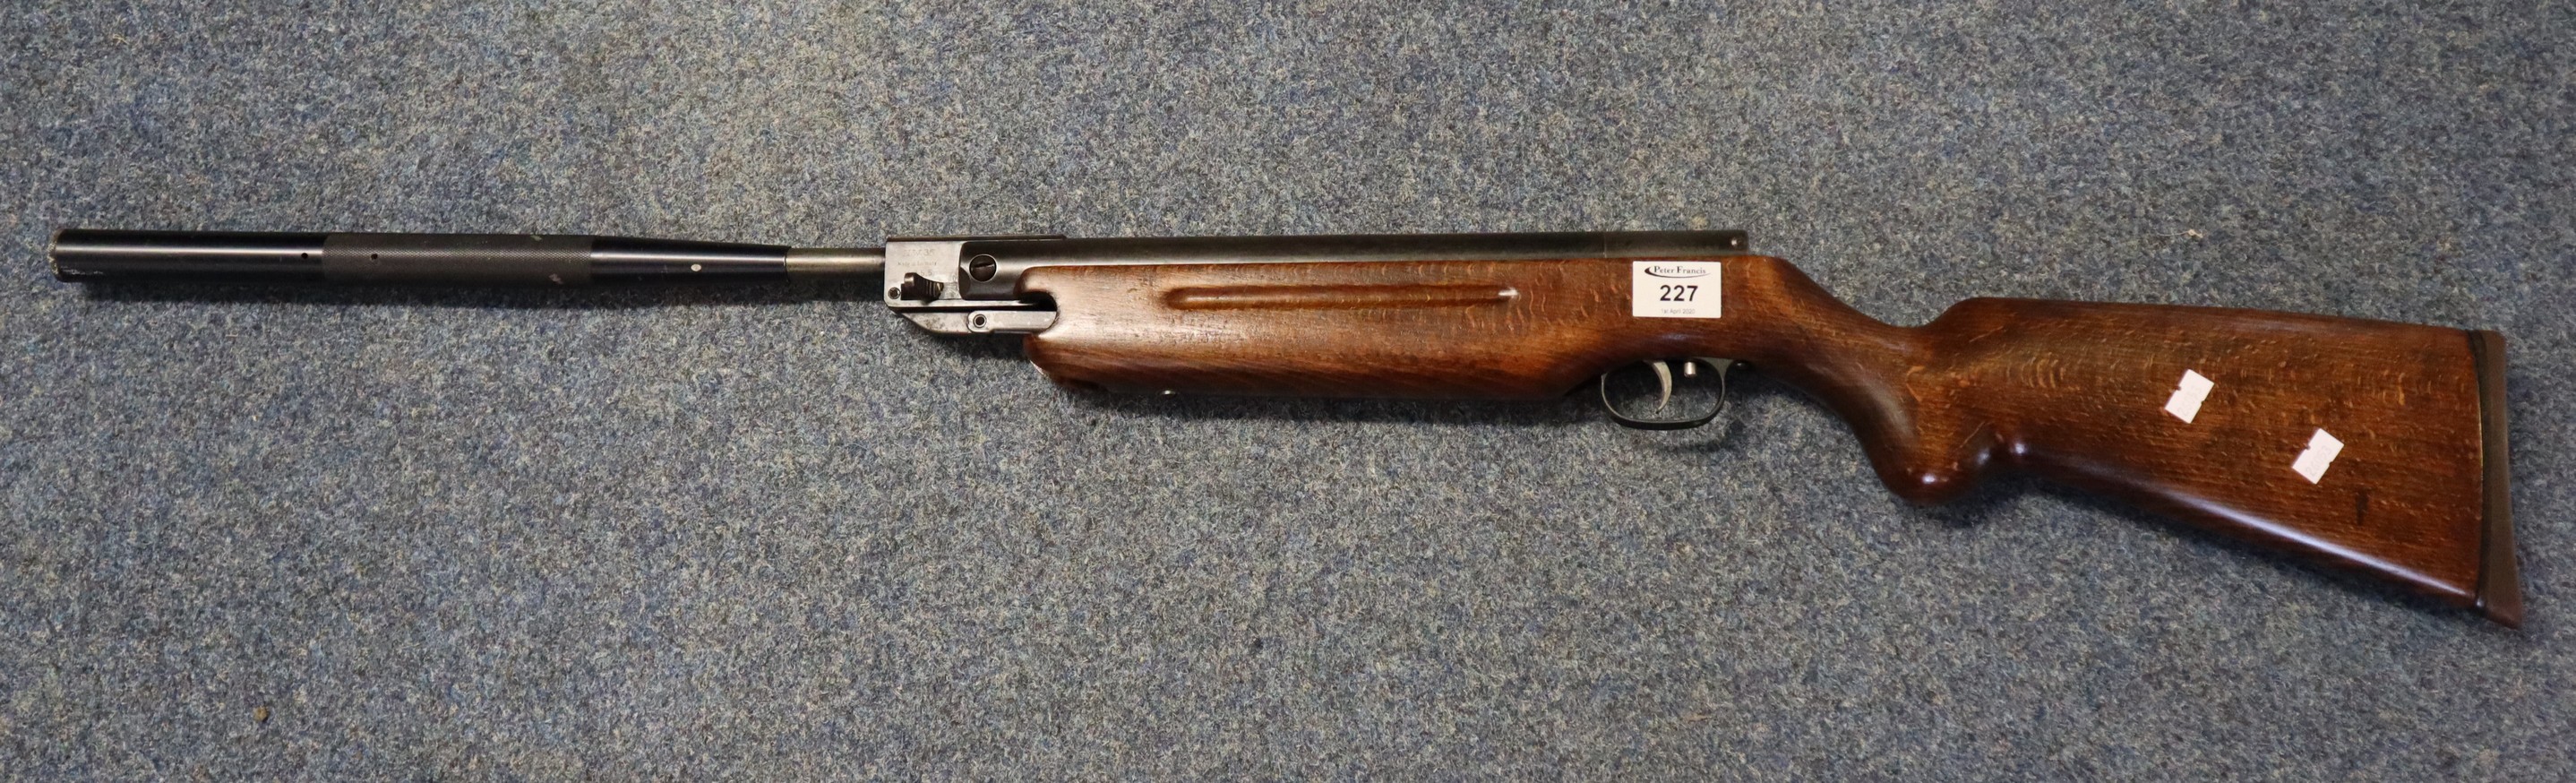 Weihrauch German .22 calibre W 35 break action air rifle with moderator. Over 18's only. (B.P. 24%